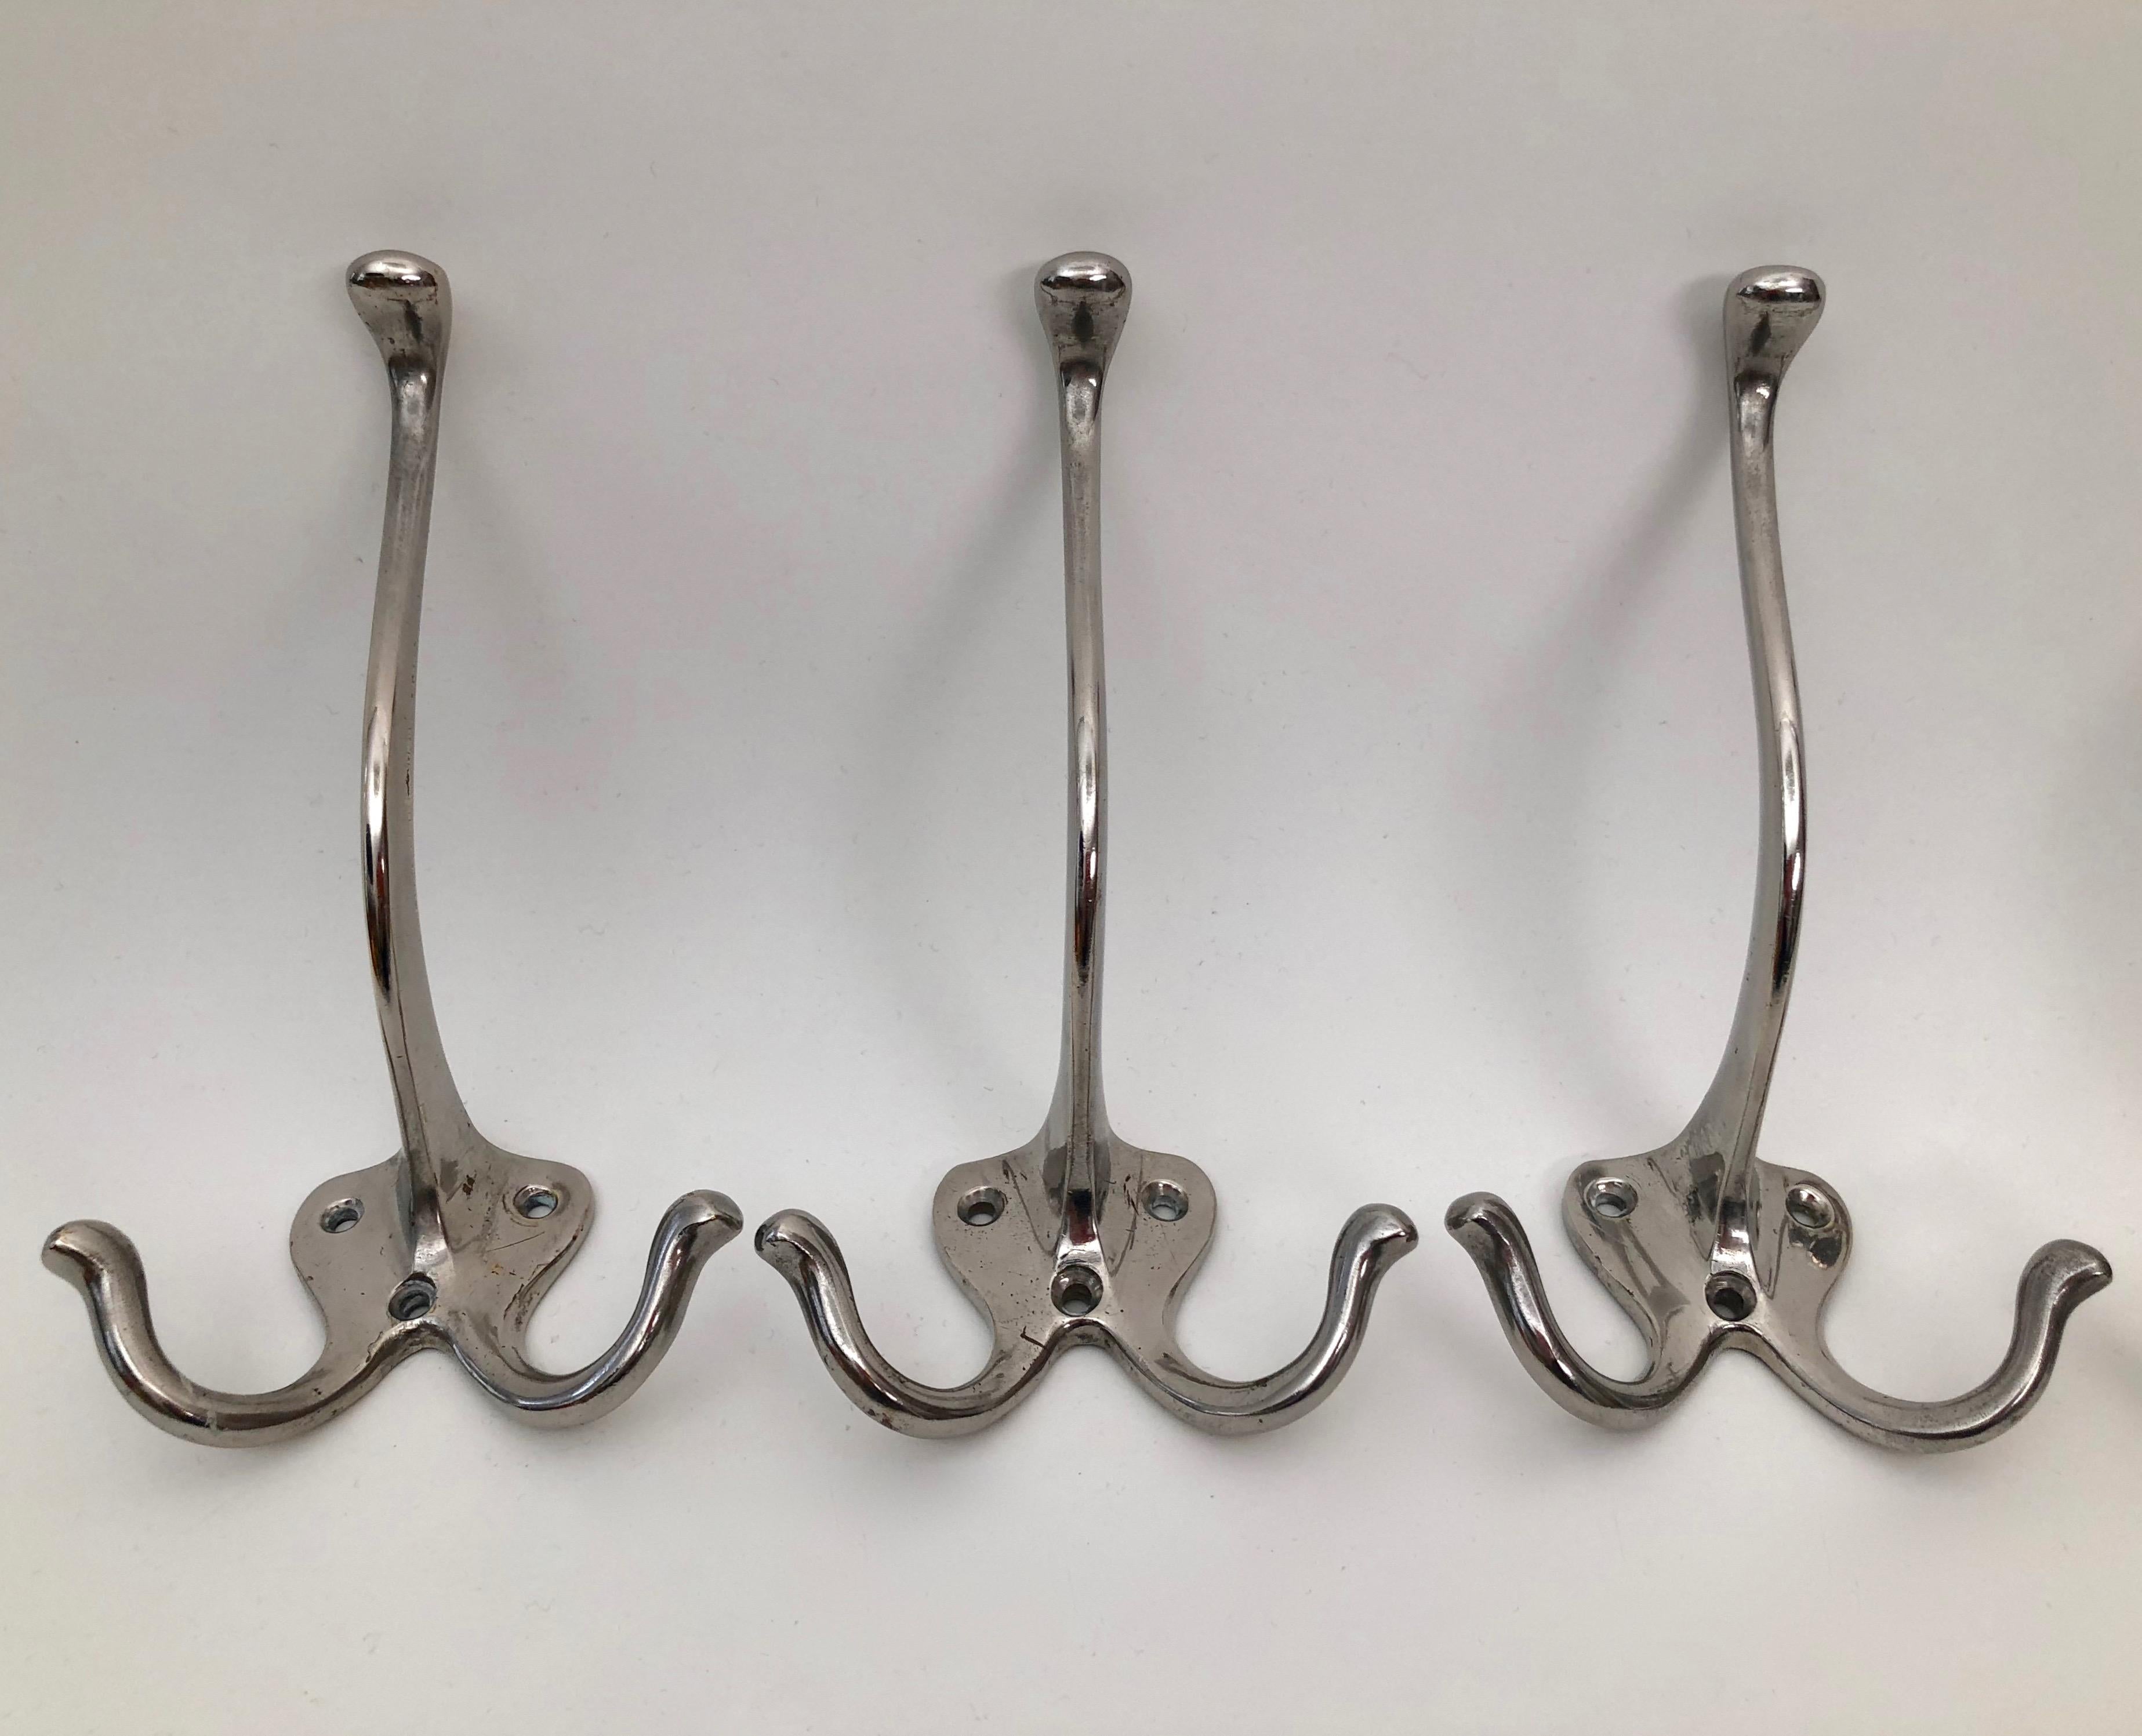 Six Jugendstil coat hooks for wall mounting. The hooks are made from cast iron and are nickel-plated. They were manufactured, circa
1900. The nickel platting is in very good condition with some wear from clothing.